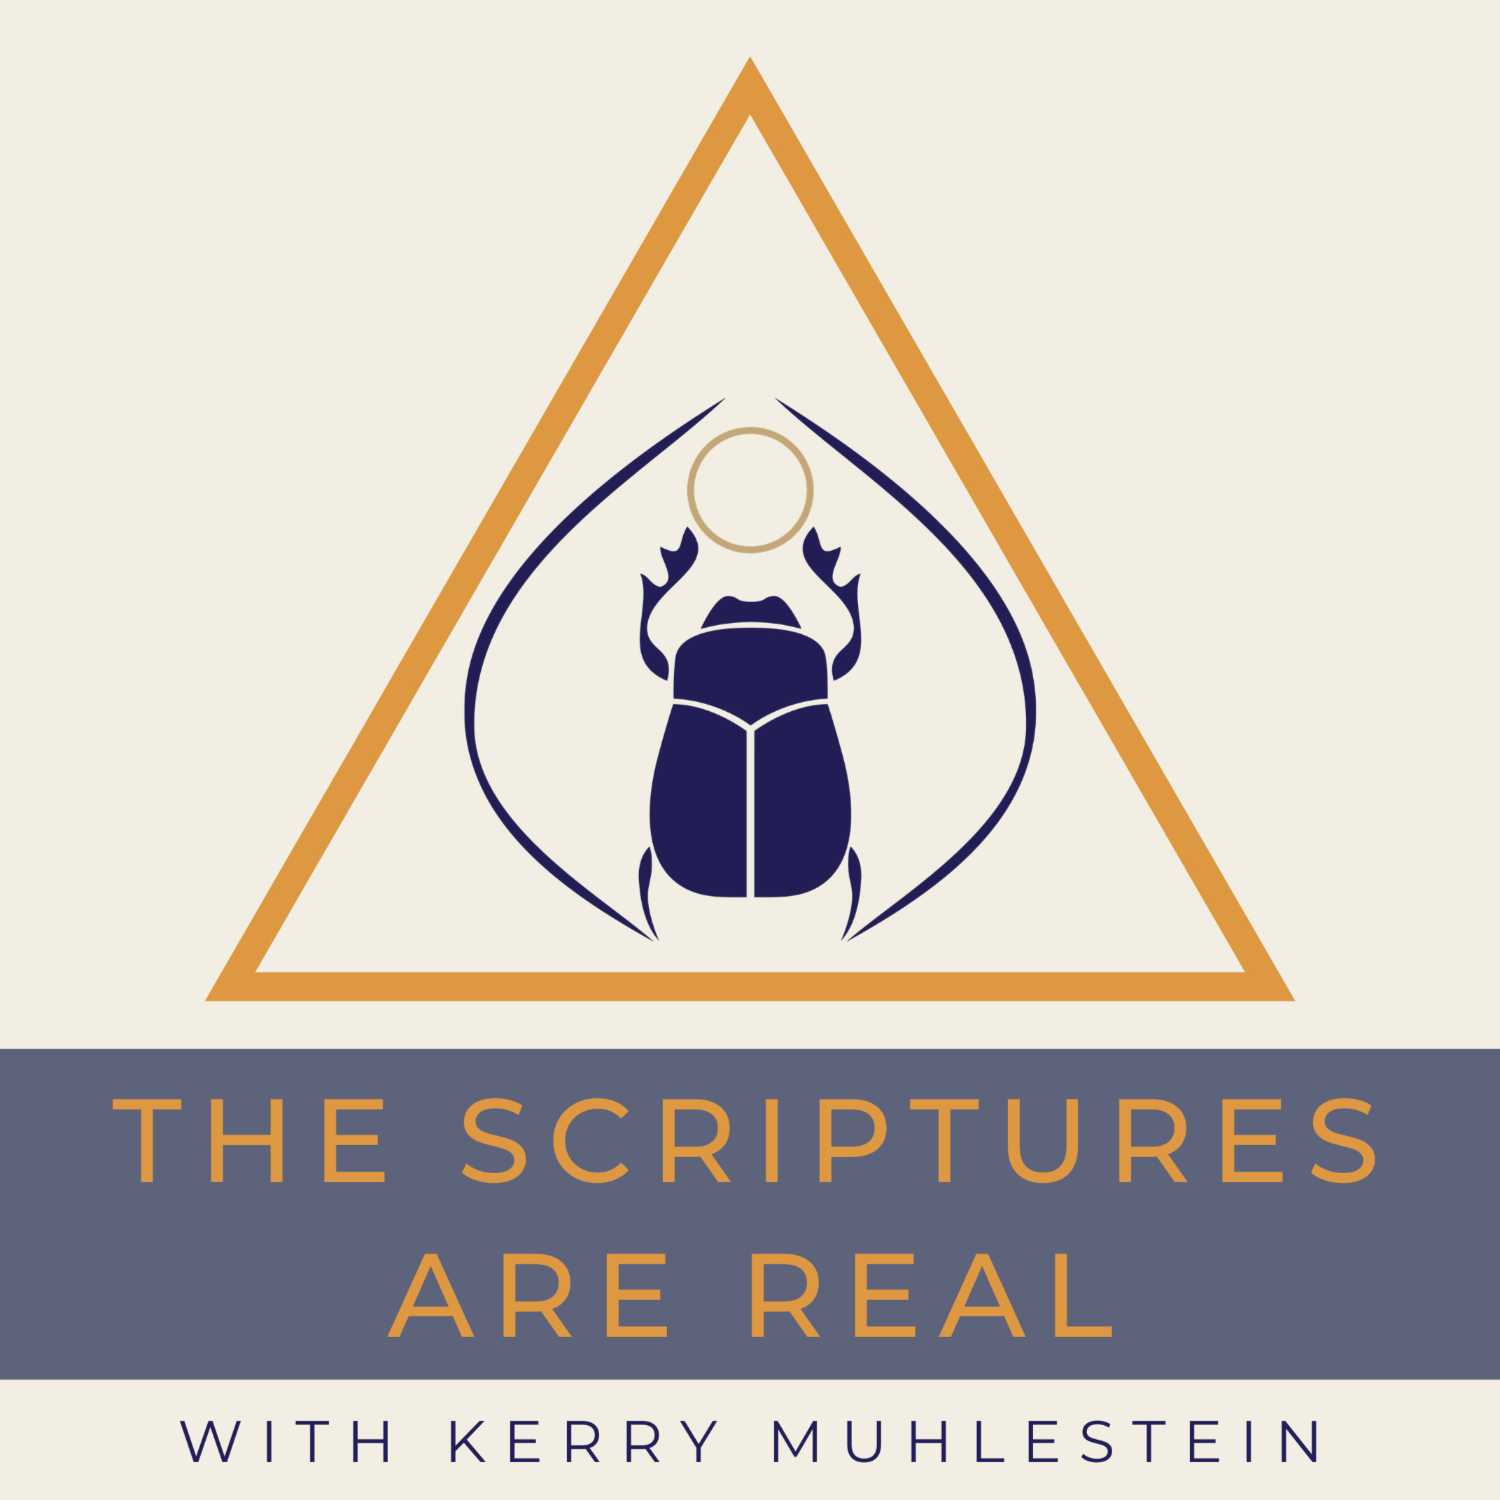 Shortcast on the Real Meaning of Judgement in the Sermon on the Mount (week of Jan. 20, second to listen to)